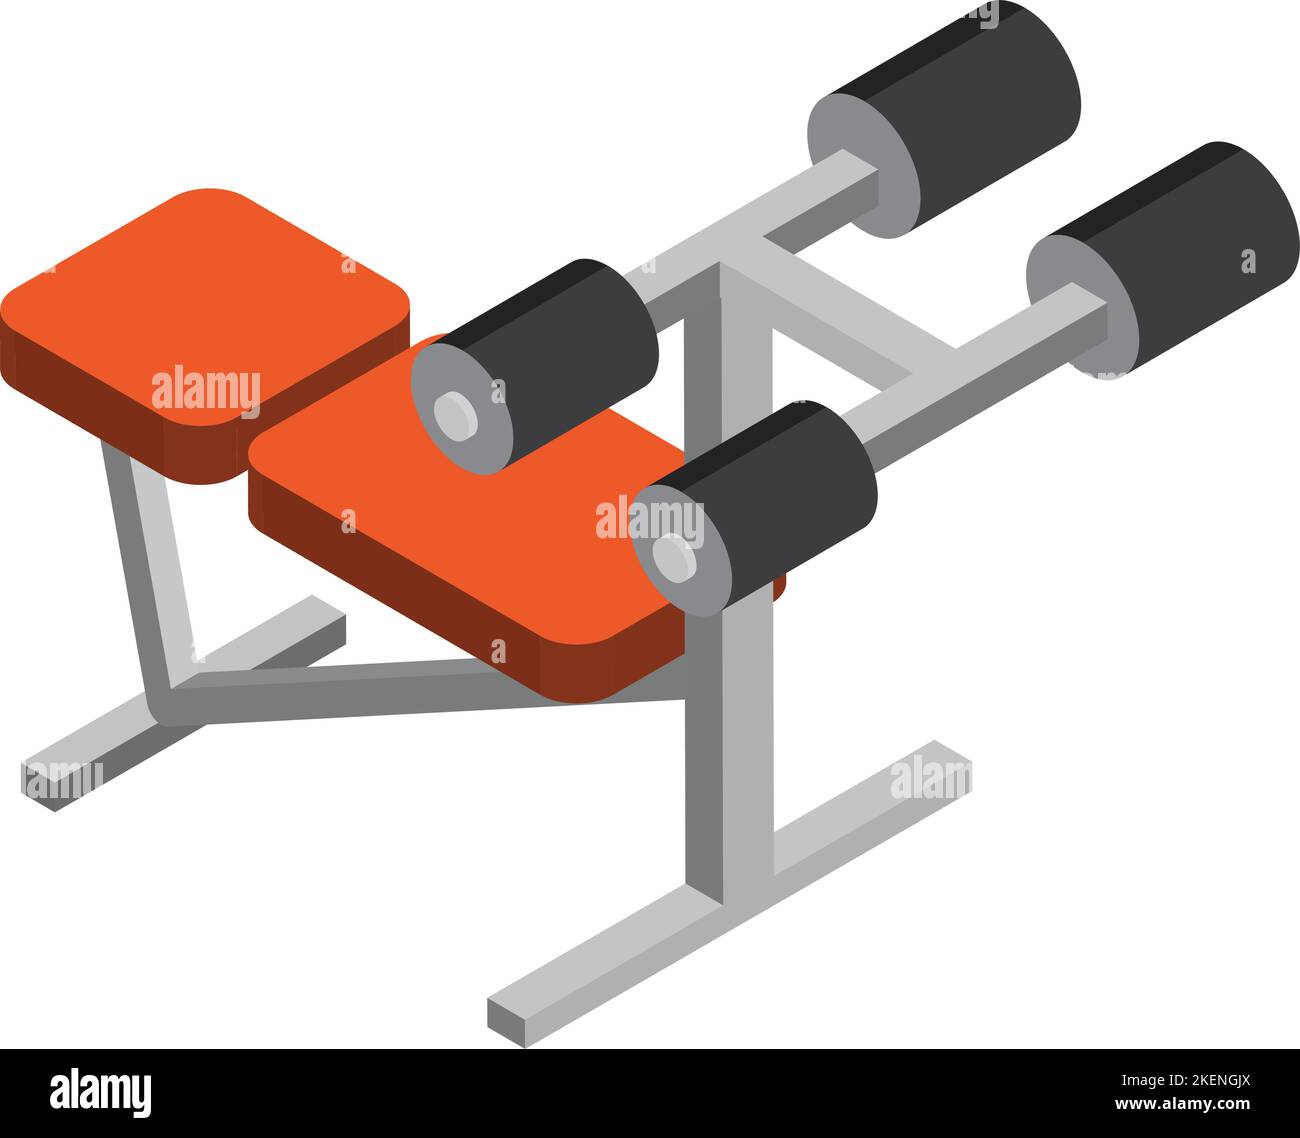 Weight lifting equipment illustration in 3D isometric style isolated on background Stock Vector